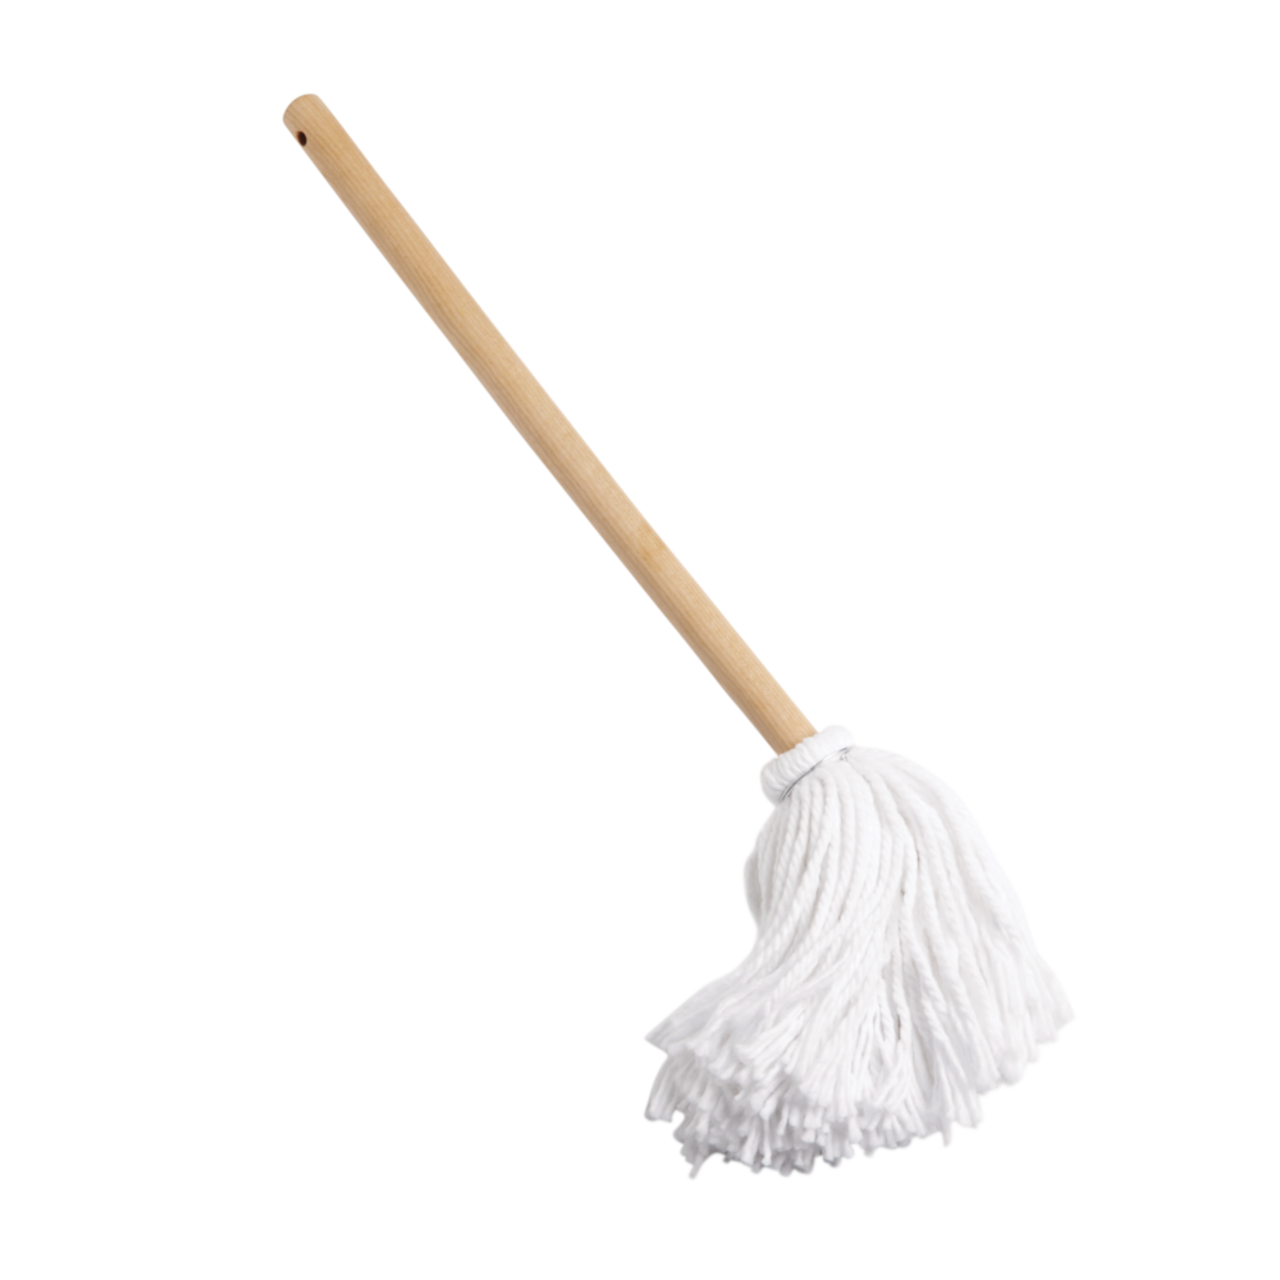 https://media-www.canadiantire.ca/product/living/cleaning/household-cleaning-tools/0429601/cotton-dish-mop-89a2ff11-d589-482b-ab09-46f6413176db.png?imdensity=1&imwidth=640&impolicy=mZoom